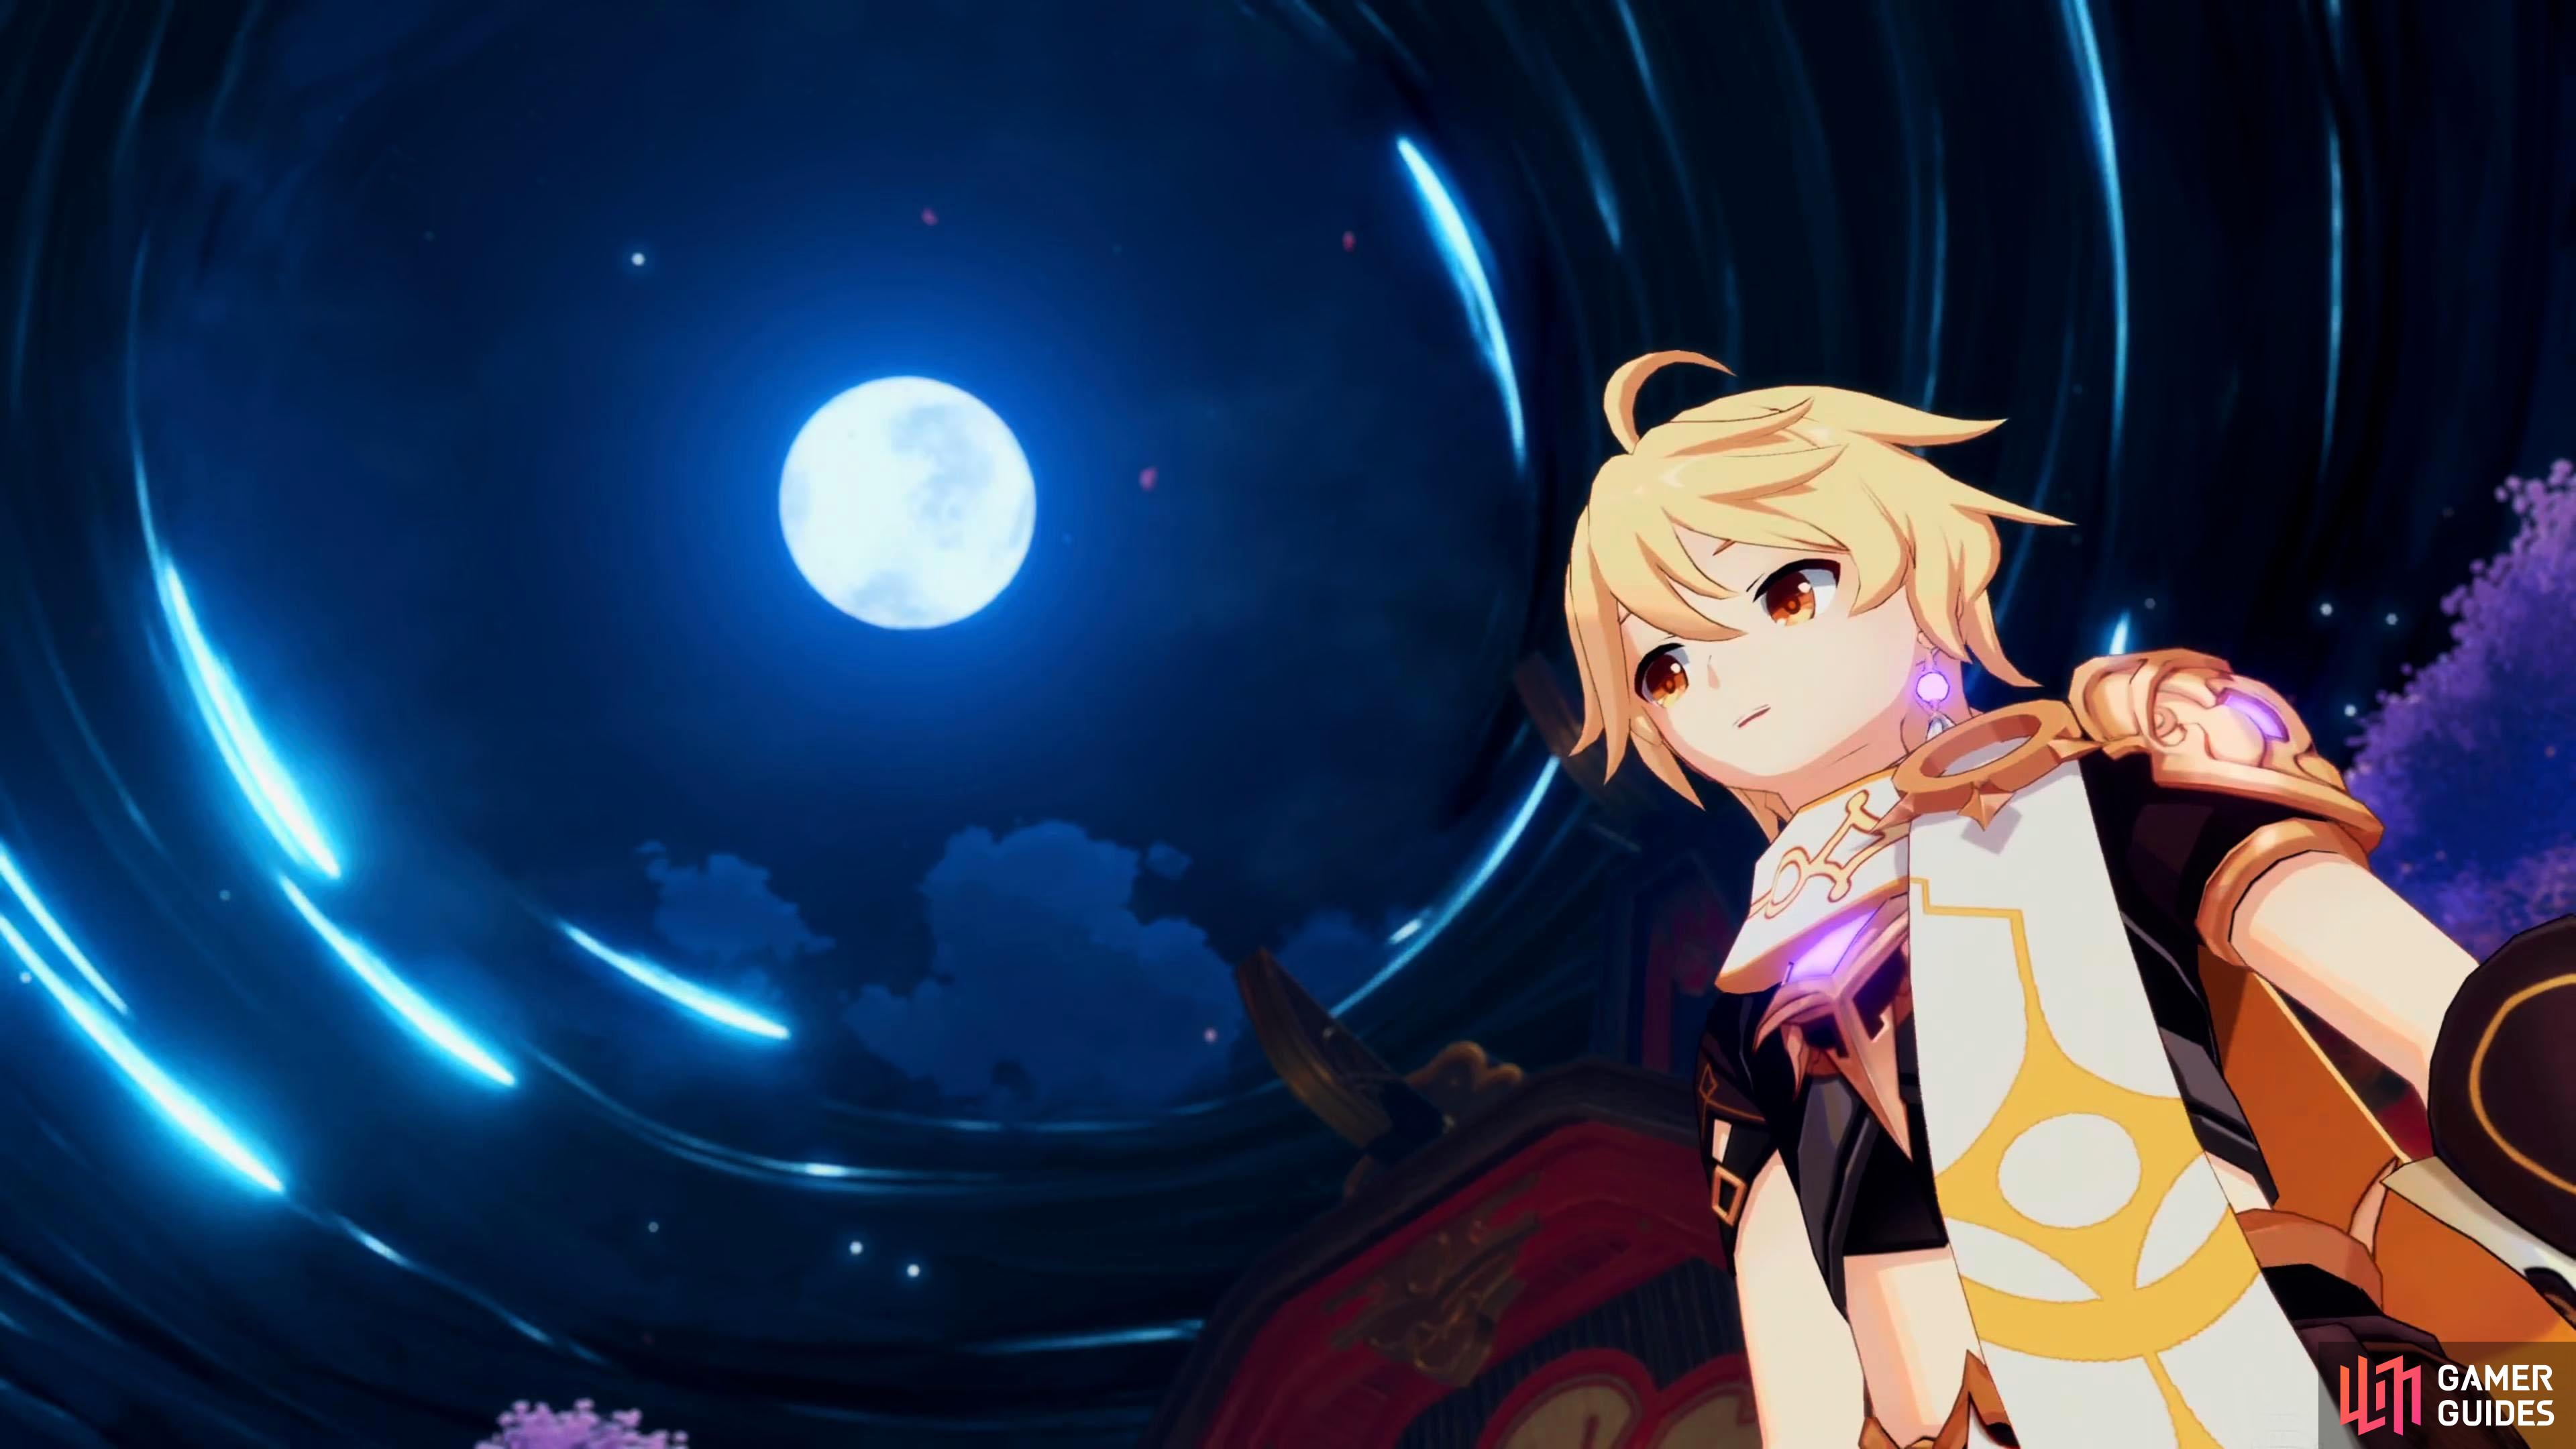 The youkai's memories are gathering in front of the moon to create a "Moonless Night".